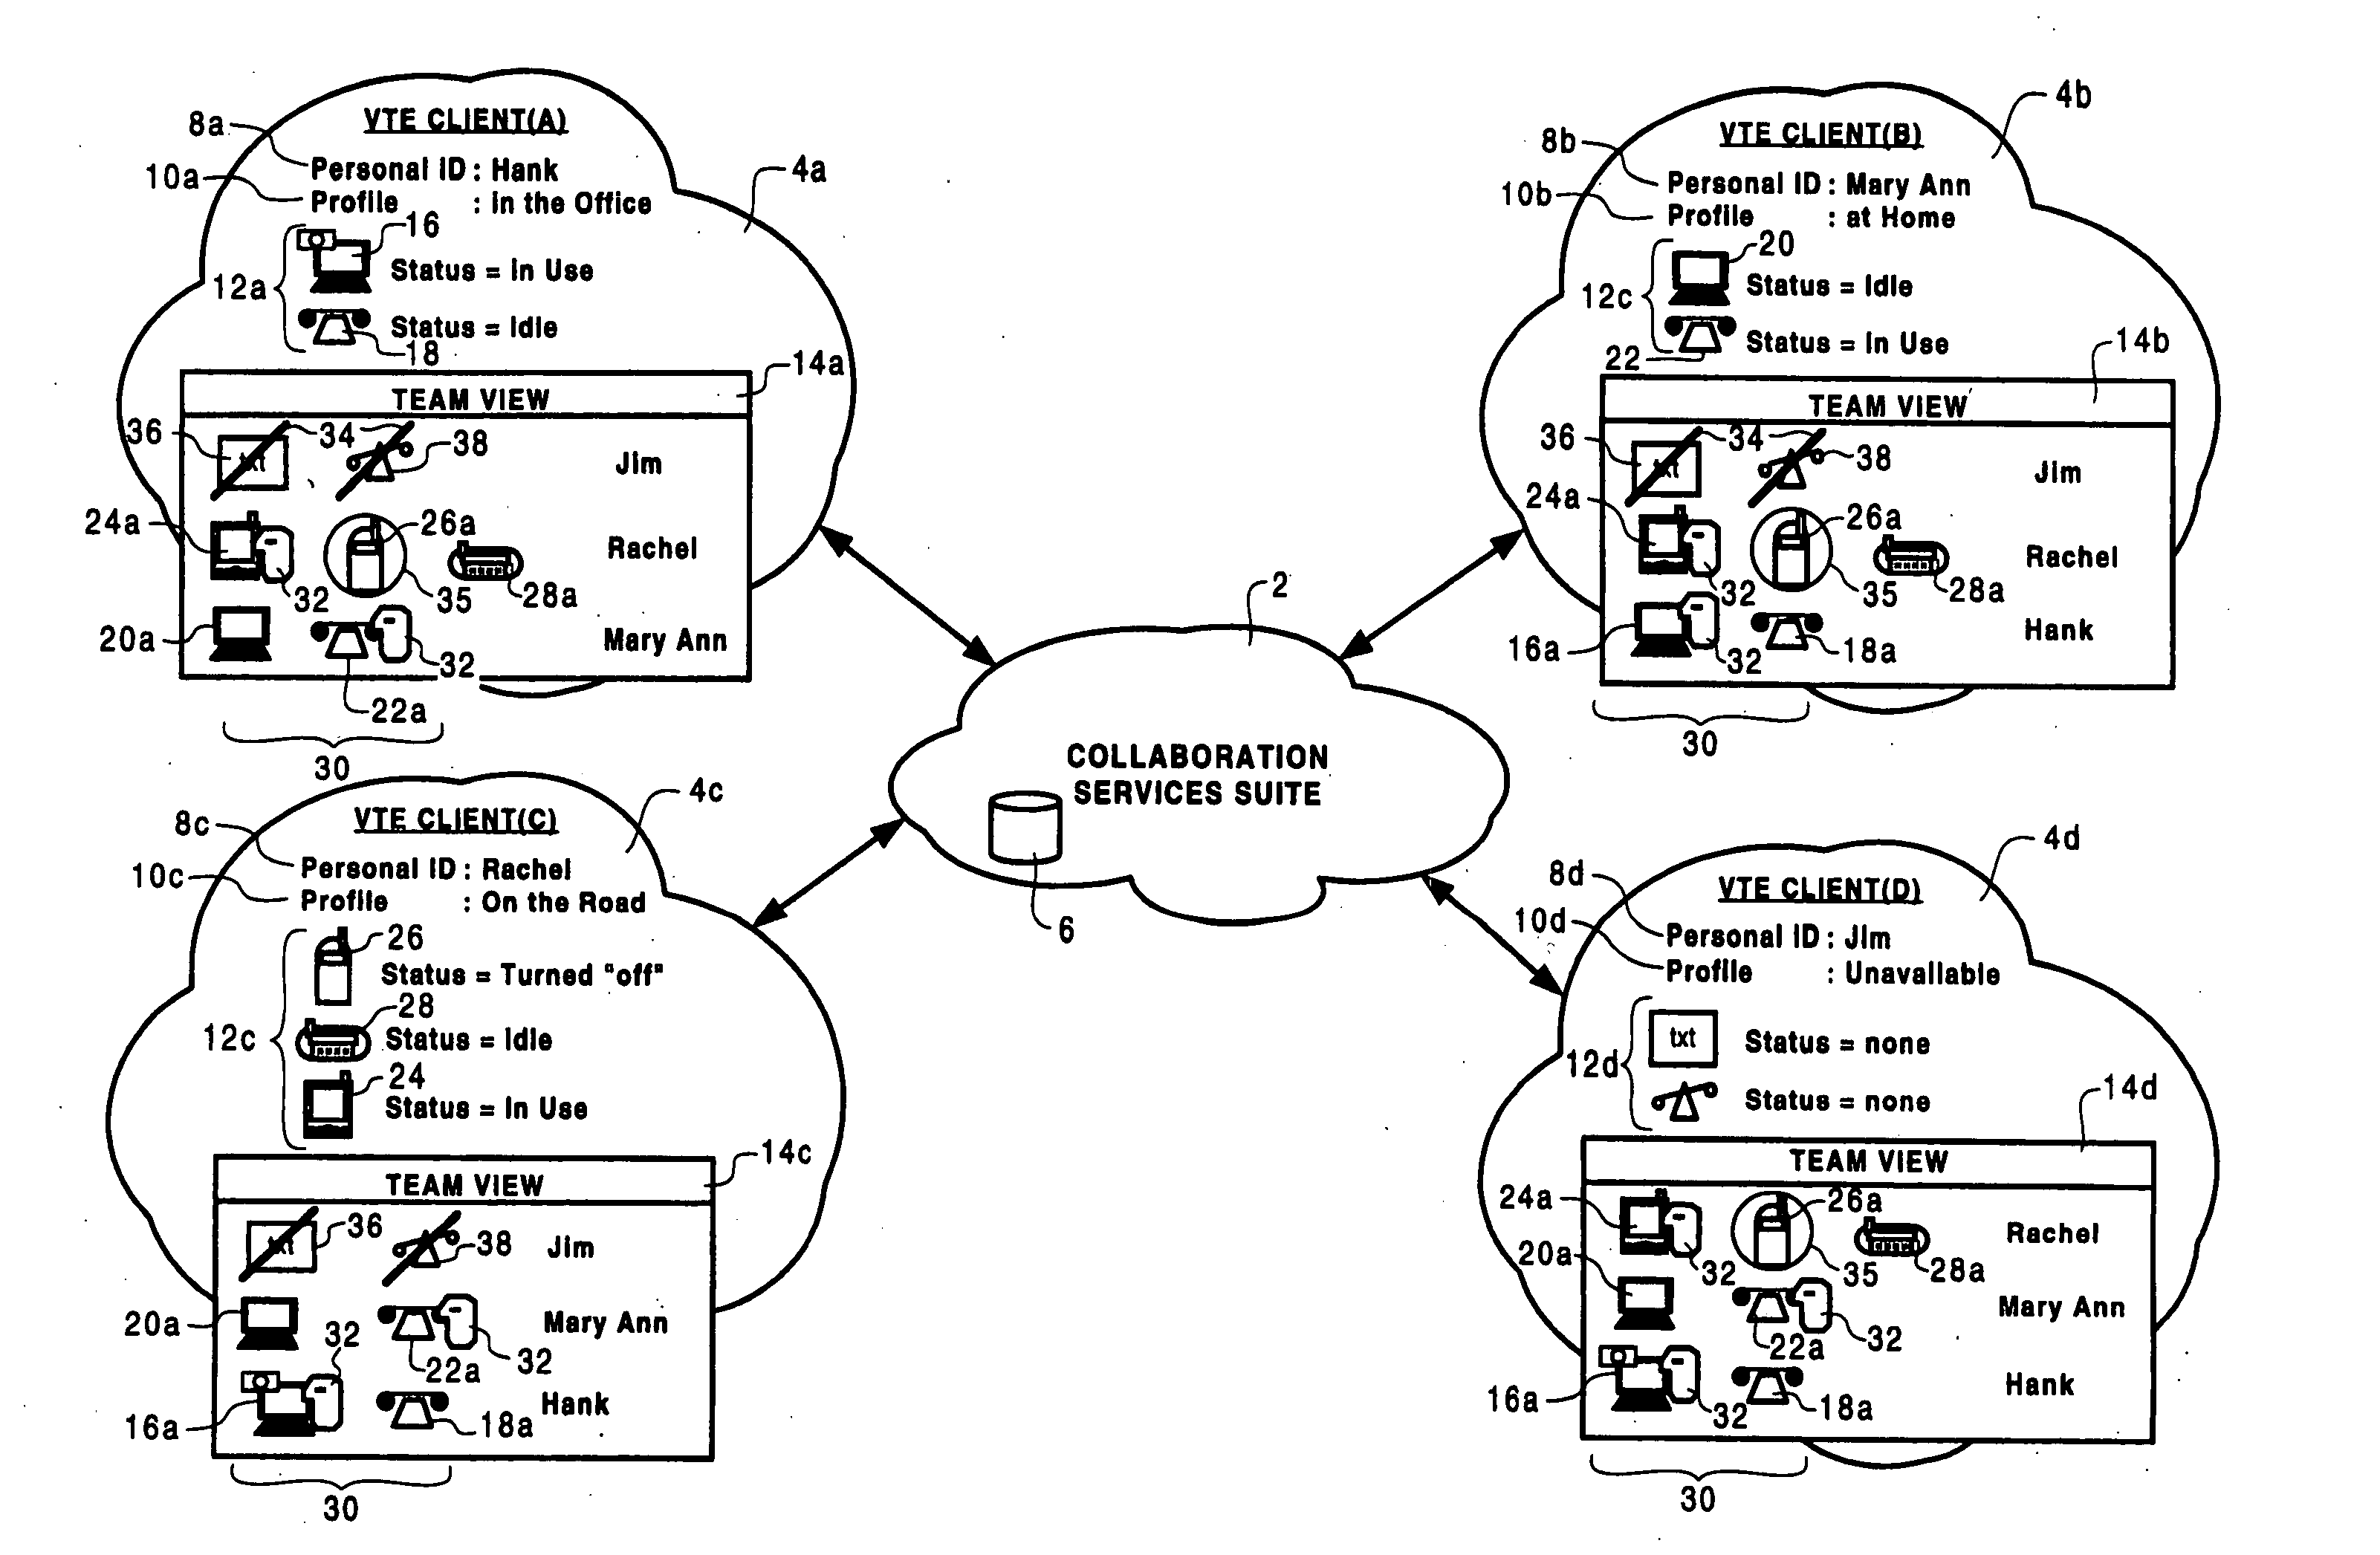 Graphical user interface for a virtual team environment